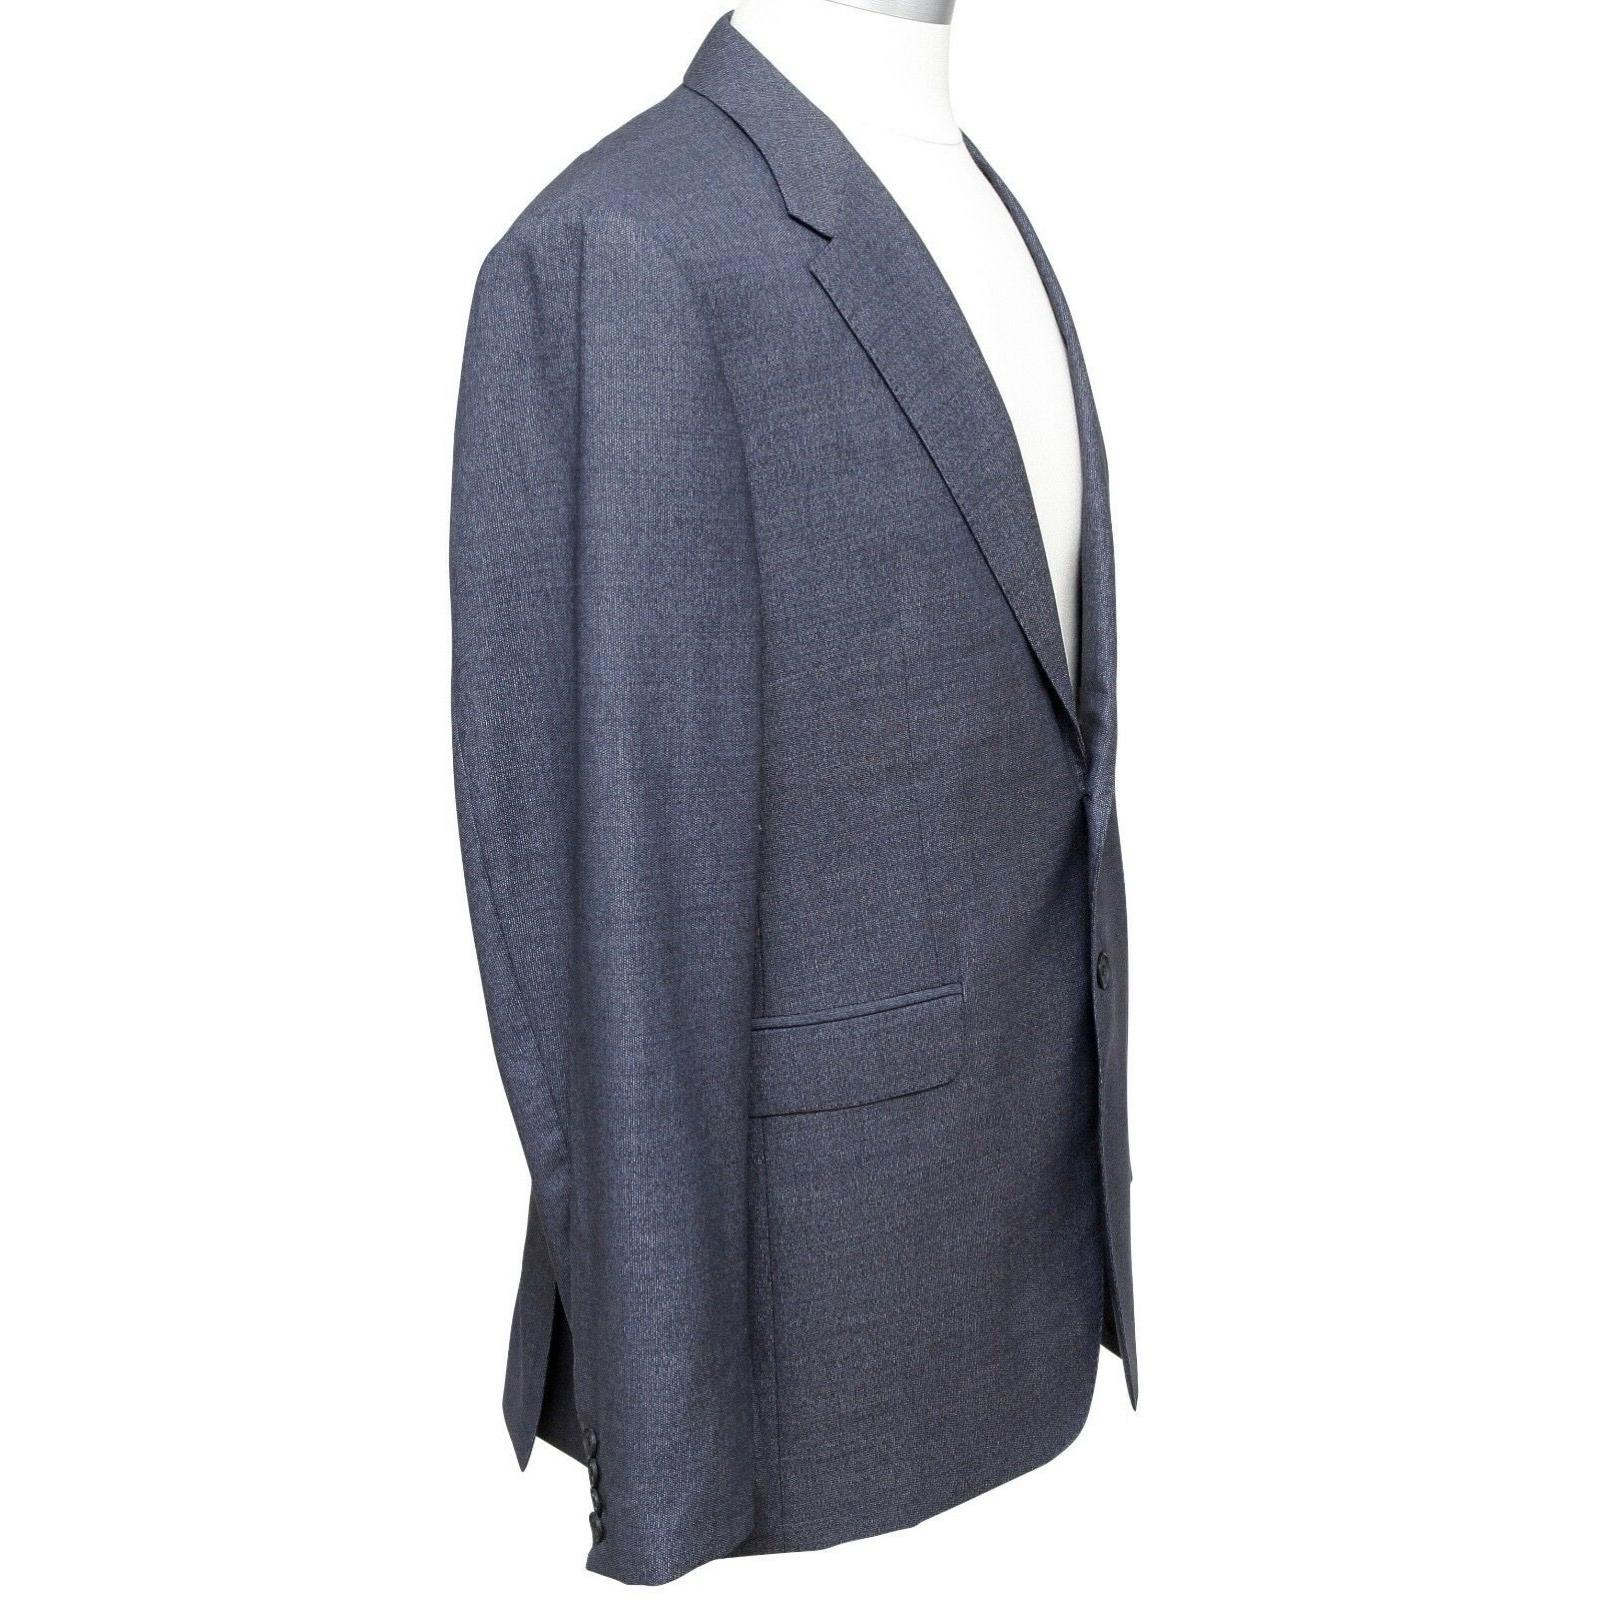 GUARANTEED AUTHENTIC MEN'S BURBERRY LONDON BLUE WOOL BLAZER



Design:
• Men's classic 2 button blazer in a classic blue (grey undertone) color.
• Notched lapel and tonal stitching.
• Signature engraved buttons.
• Dual flap pockets at hip.
• Double